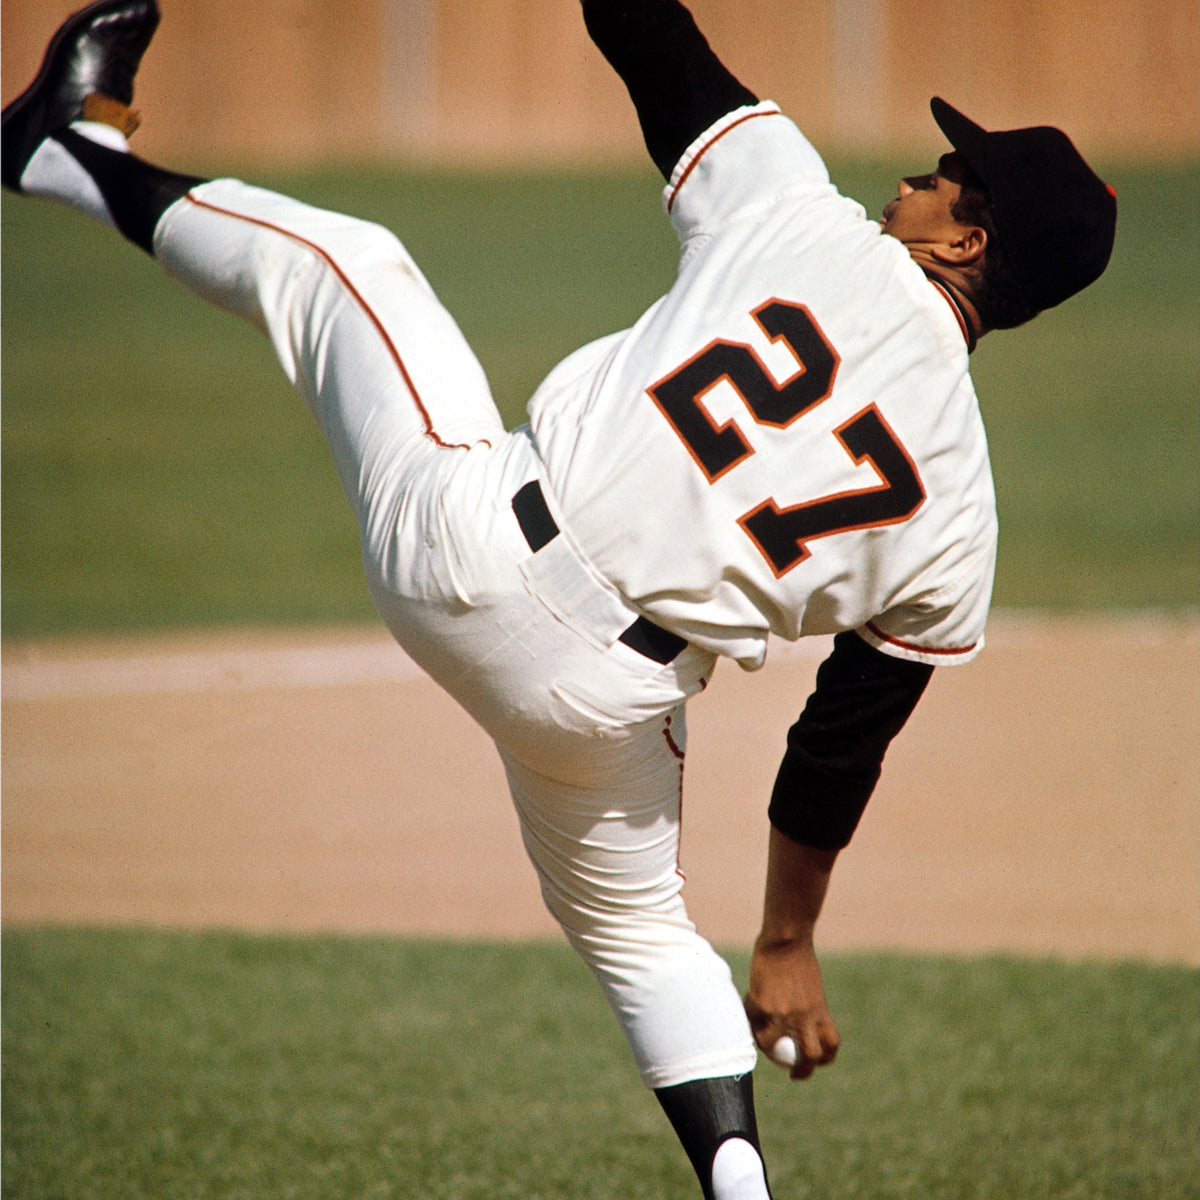 Juan Marichal Pitching to Willie Davis | Neil Leifer Photography 16 x 20 / Edition of 150